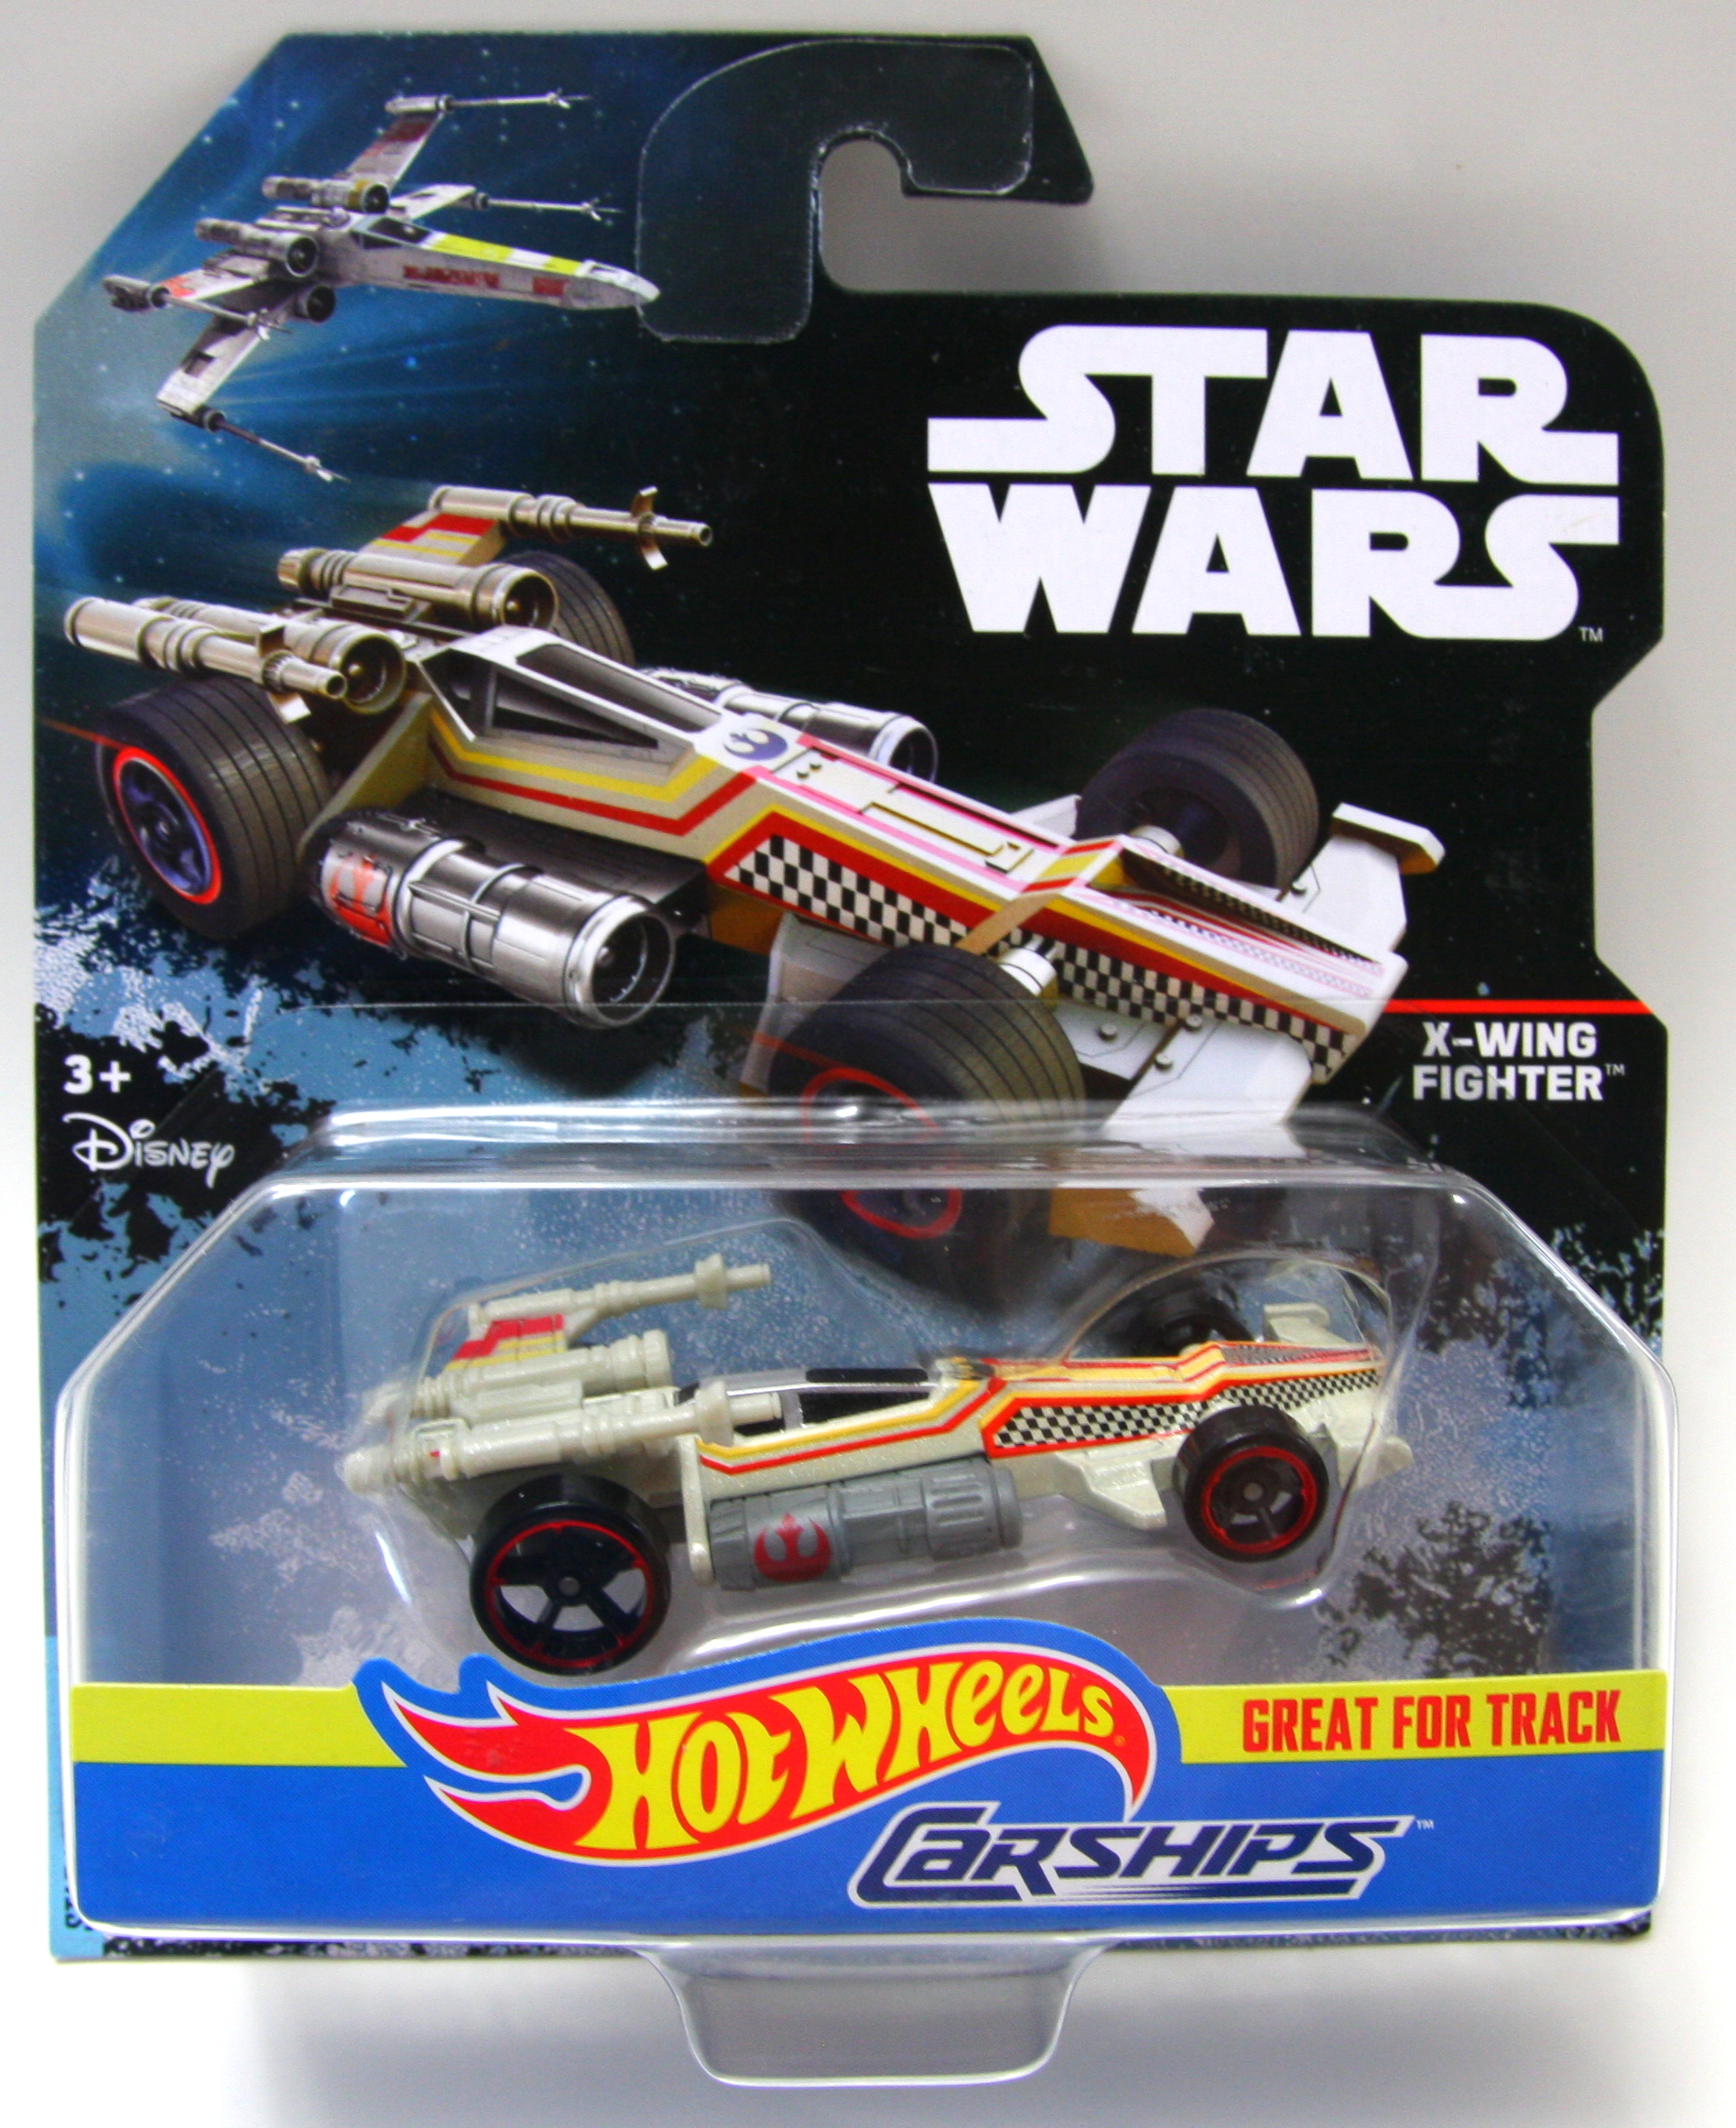 Details about   Hot Wheels Star Wars CARSHIPS "Poe’s X-Wing Fighter" 2017 NEW 